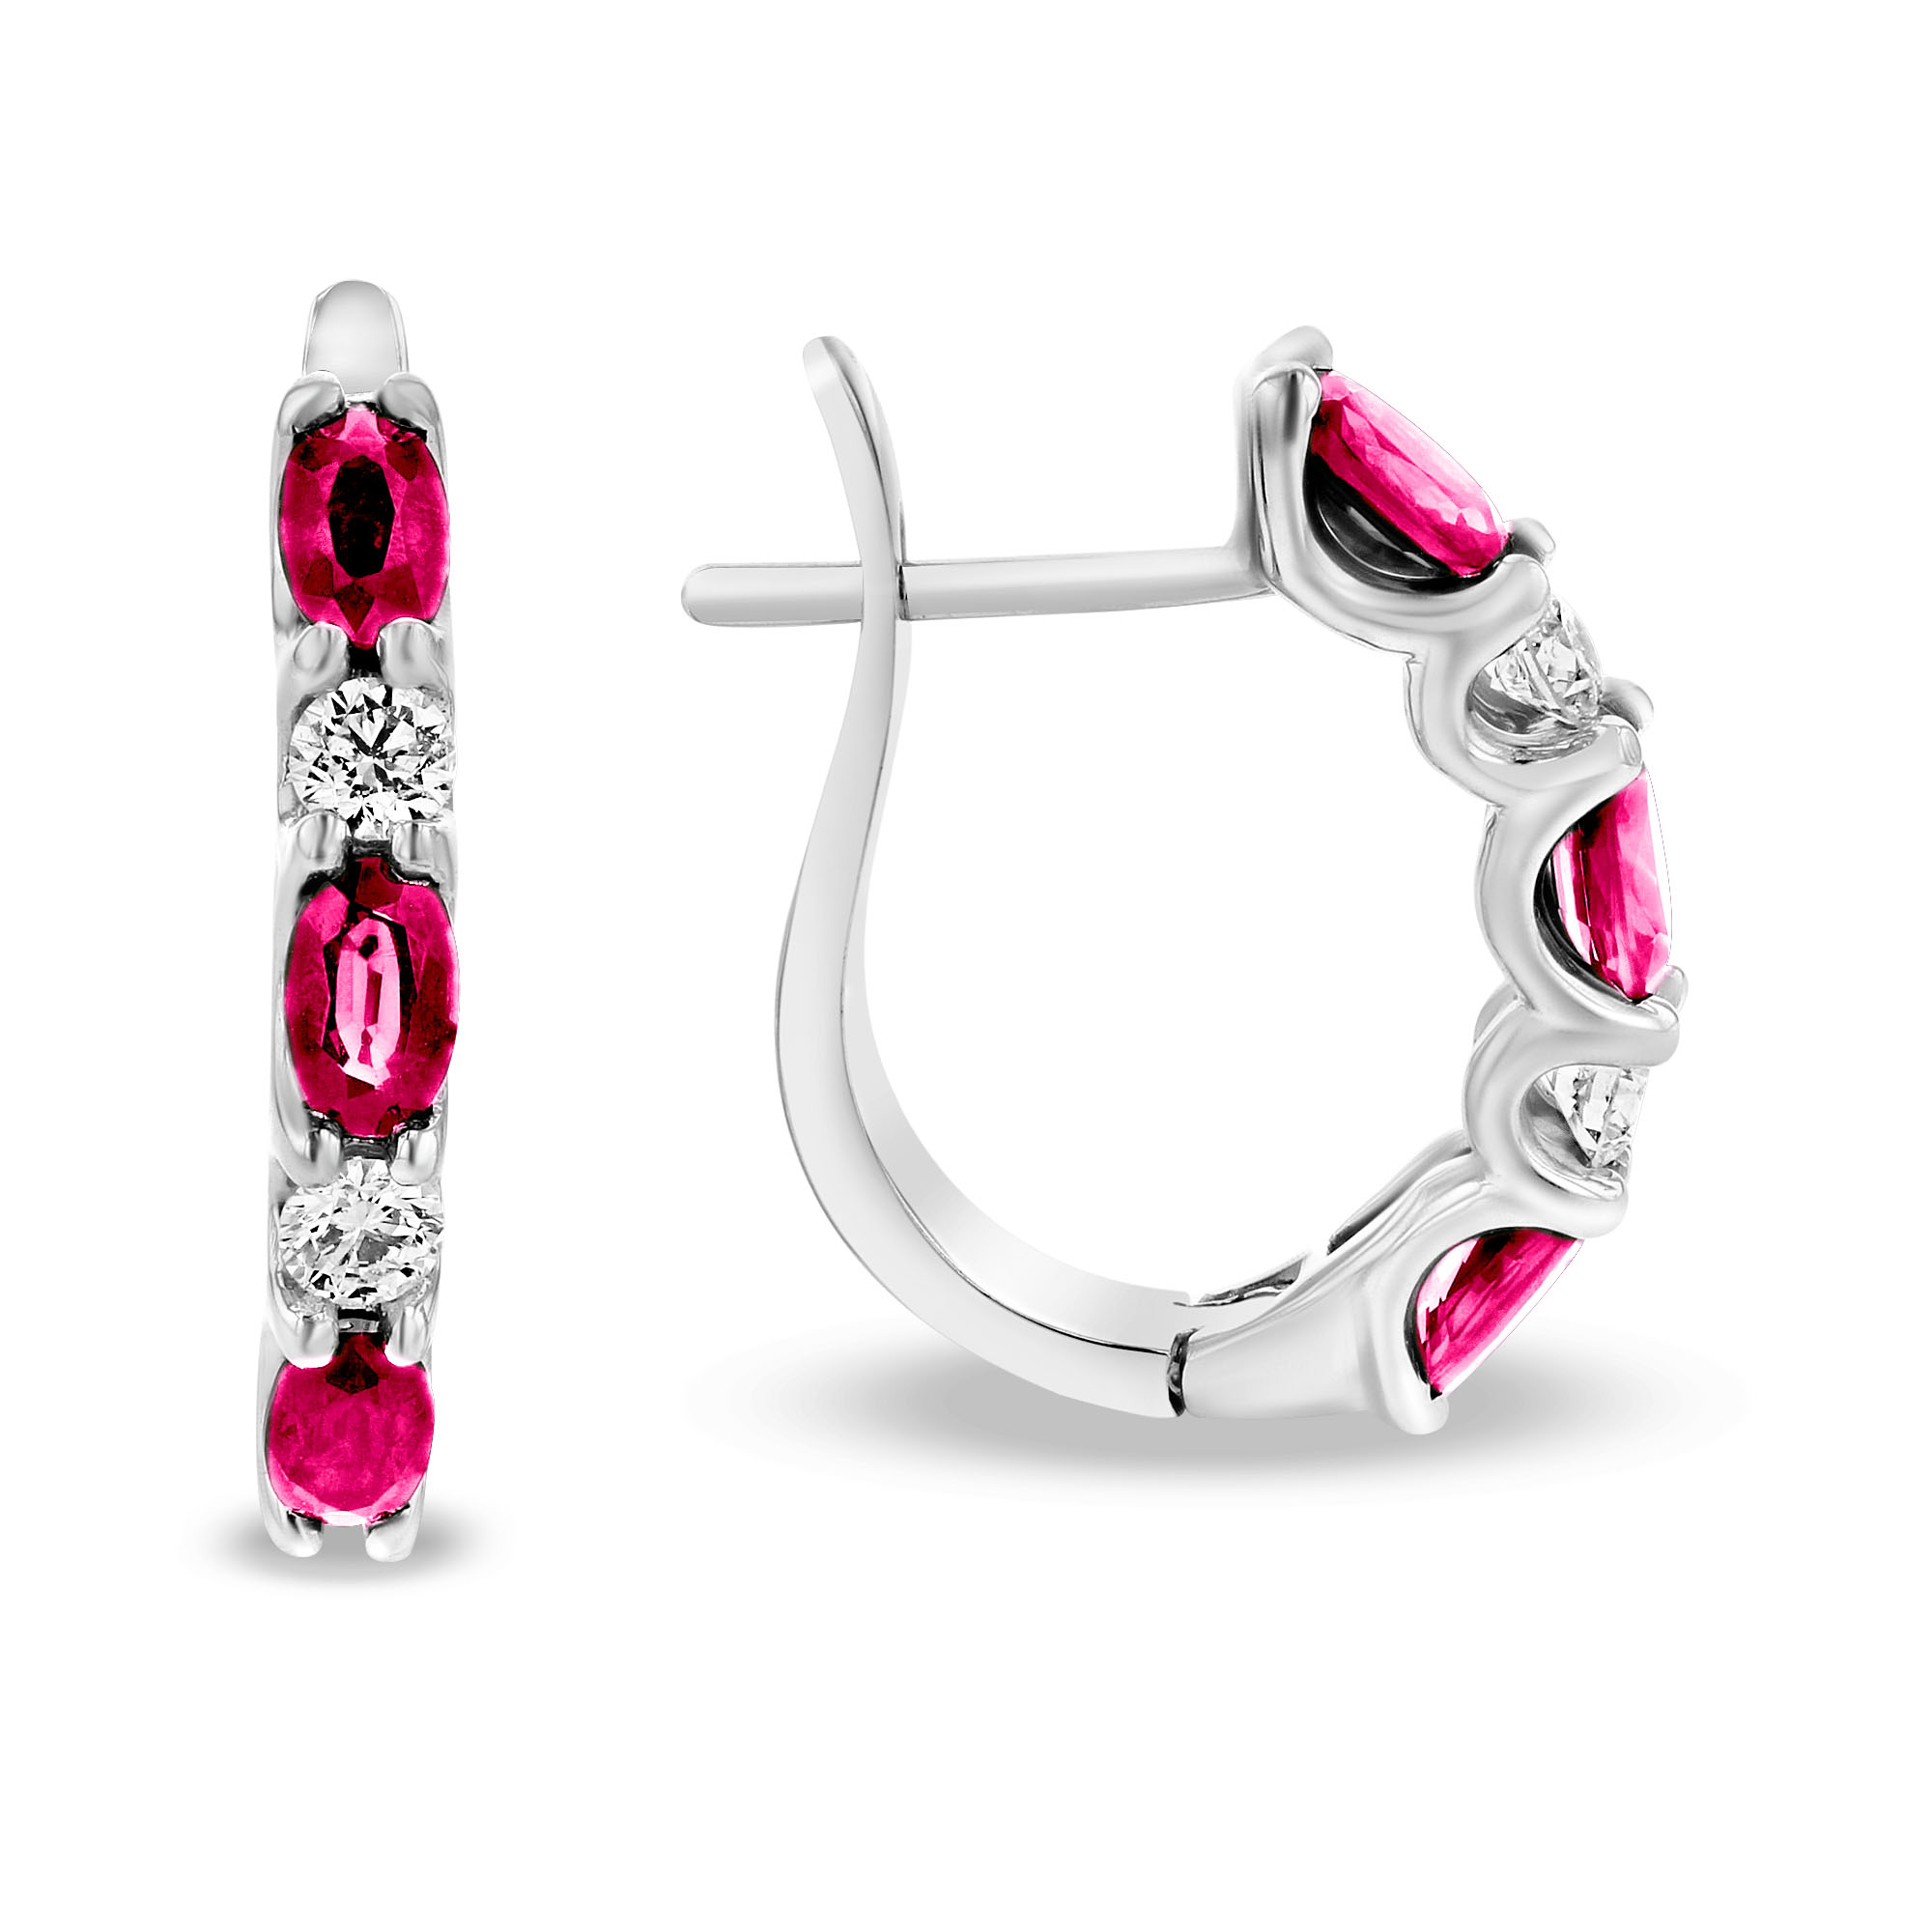 View 2.00ctw Diamond and Ruby Hoop Earrings in 14k White Gold